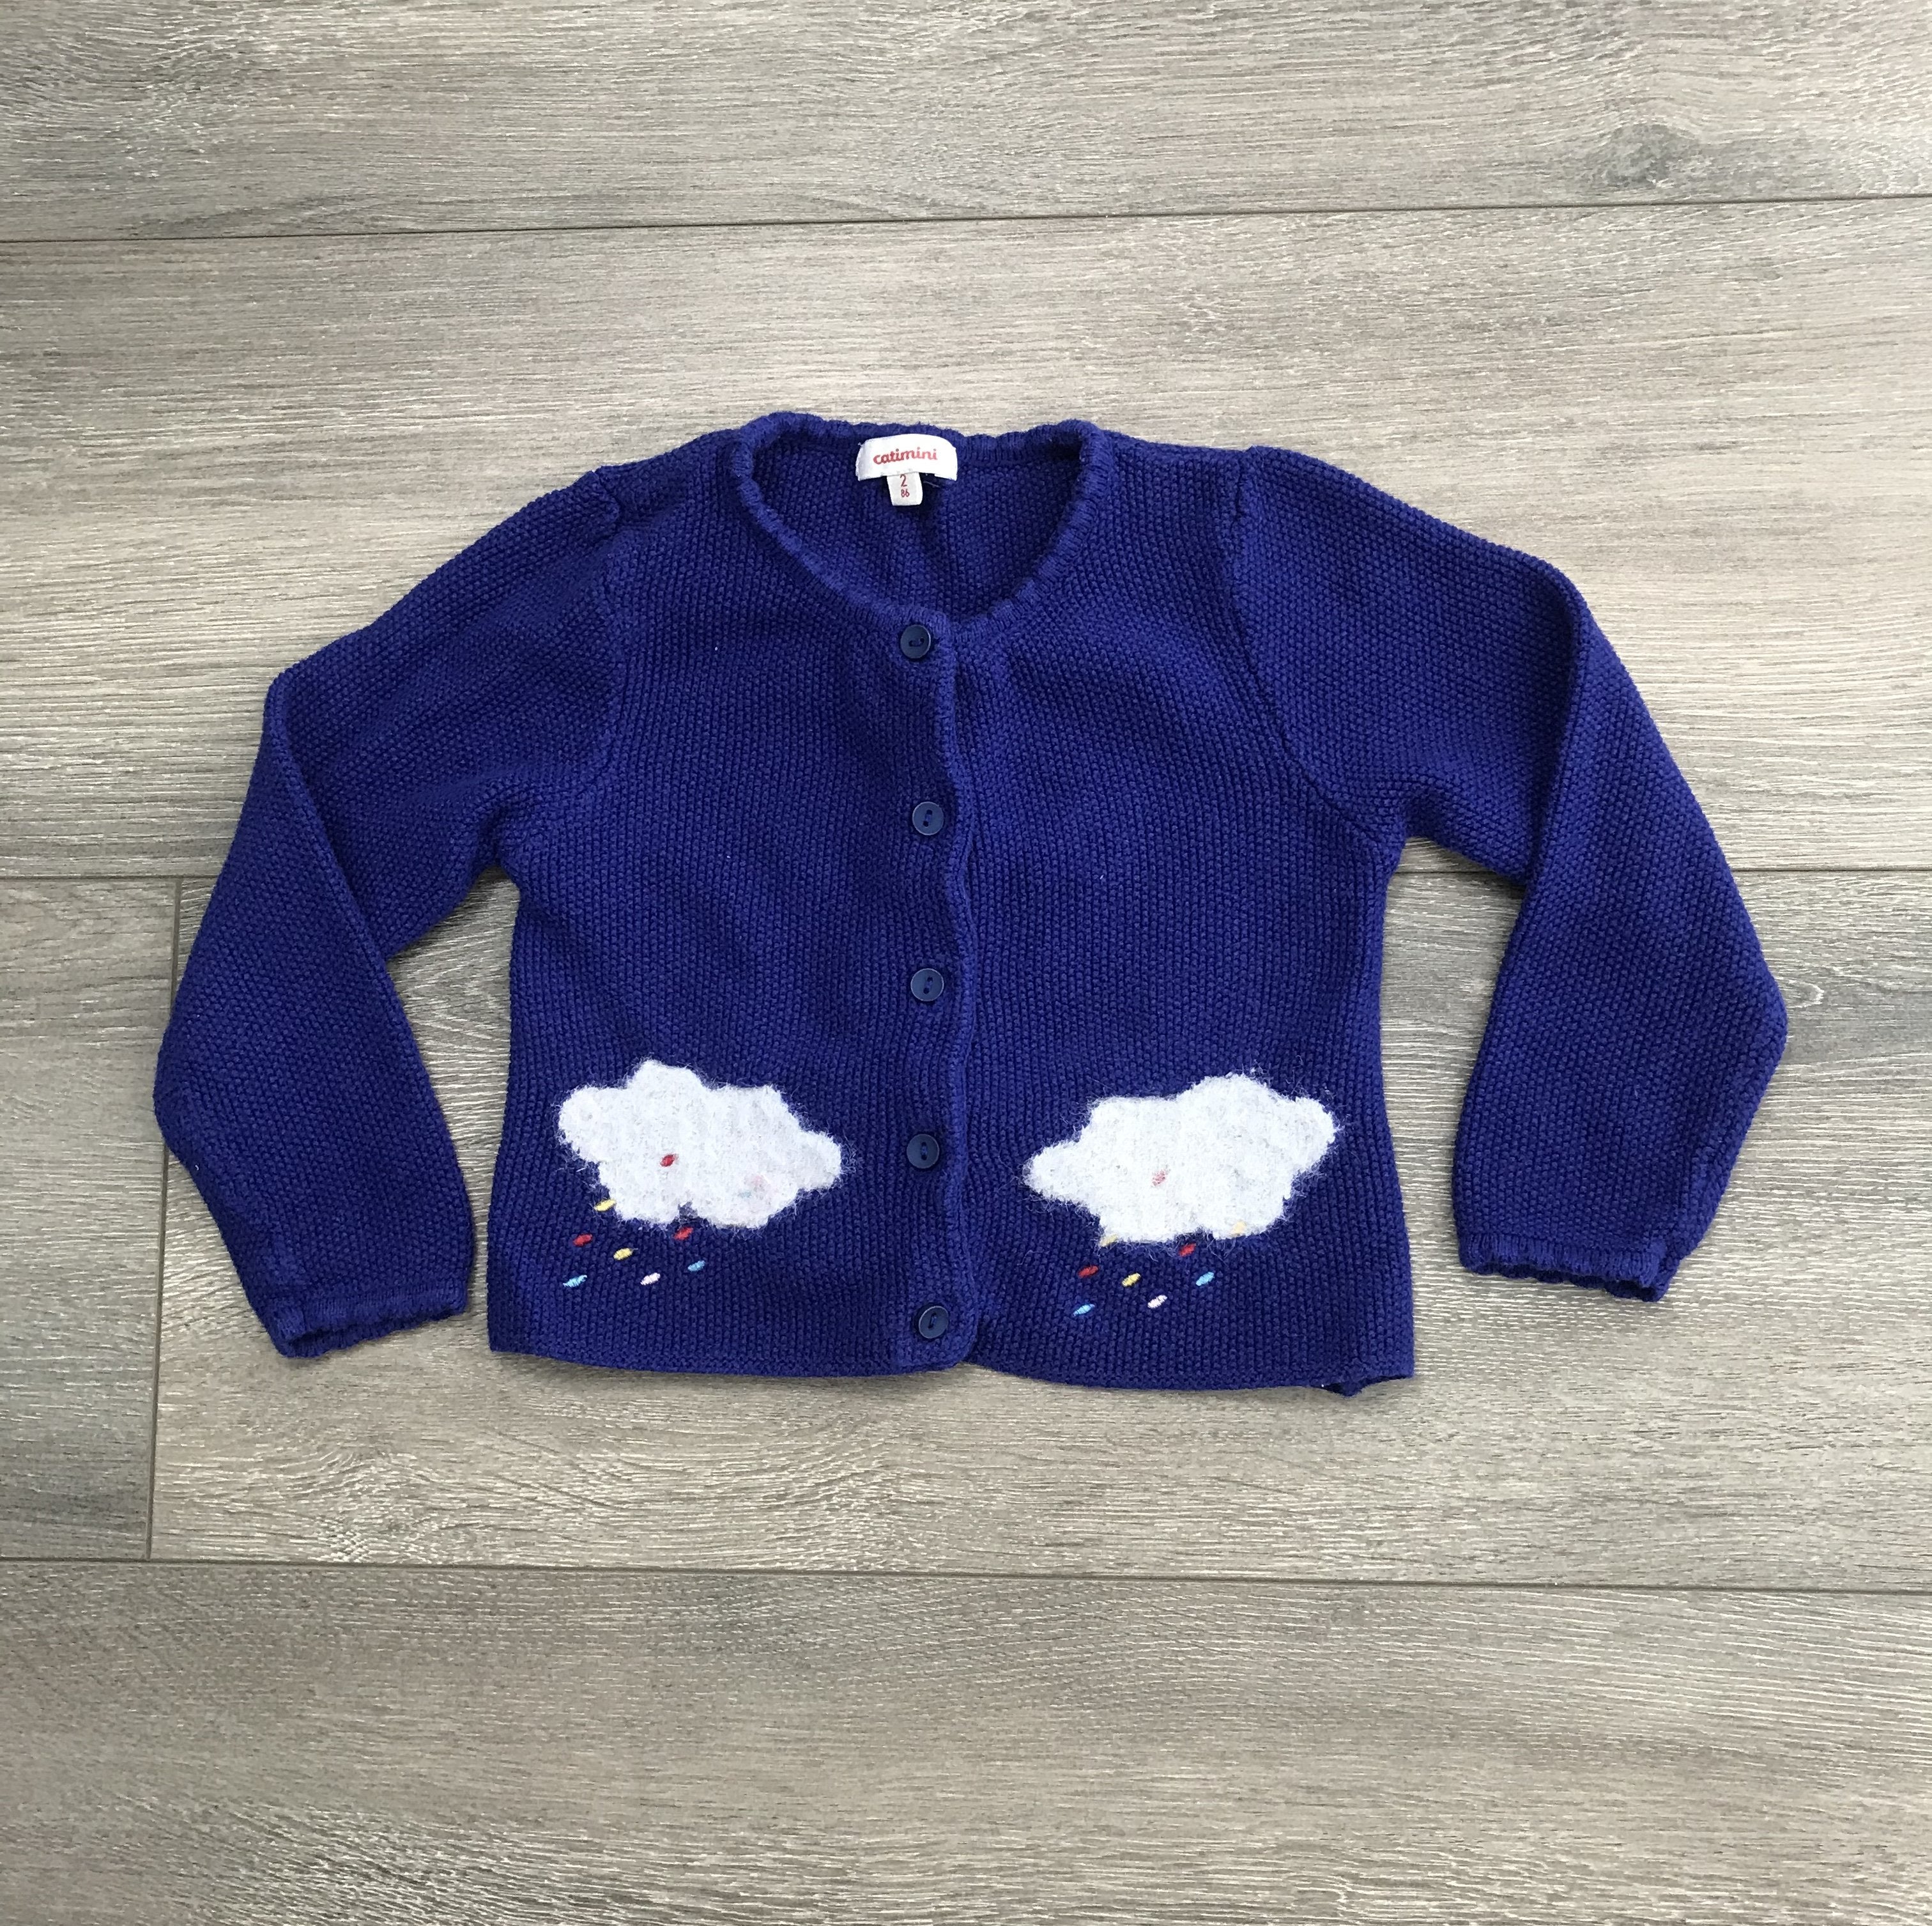 Catimini Cloud Knit Cardigan, Designed in France. Simplistic premium baby clothes., Blue, 38% Modal, 36% Cotton, 26% Polyamide, toddler clothes, 24 months baby cardigan, baby girl cardigan